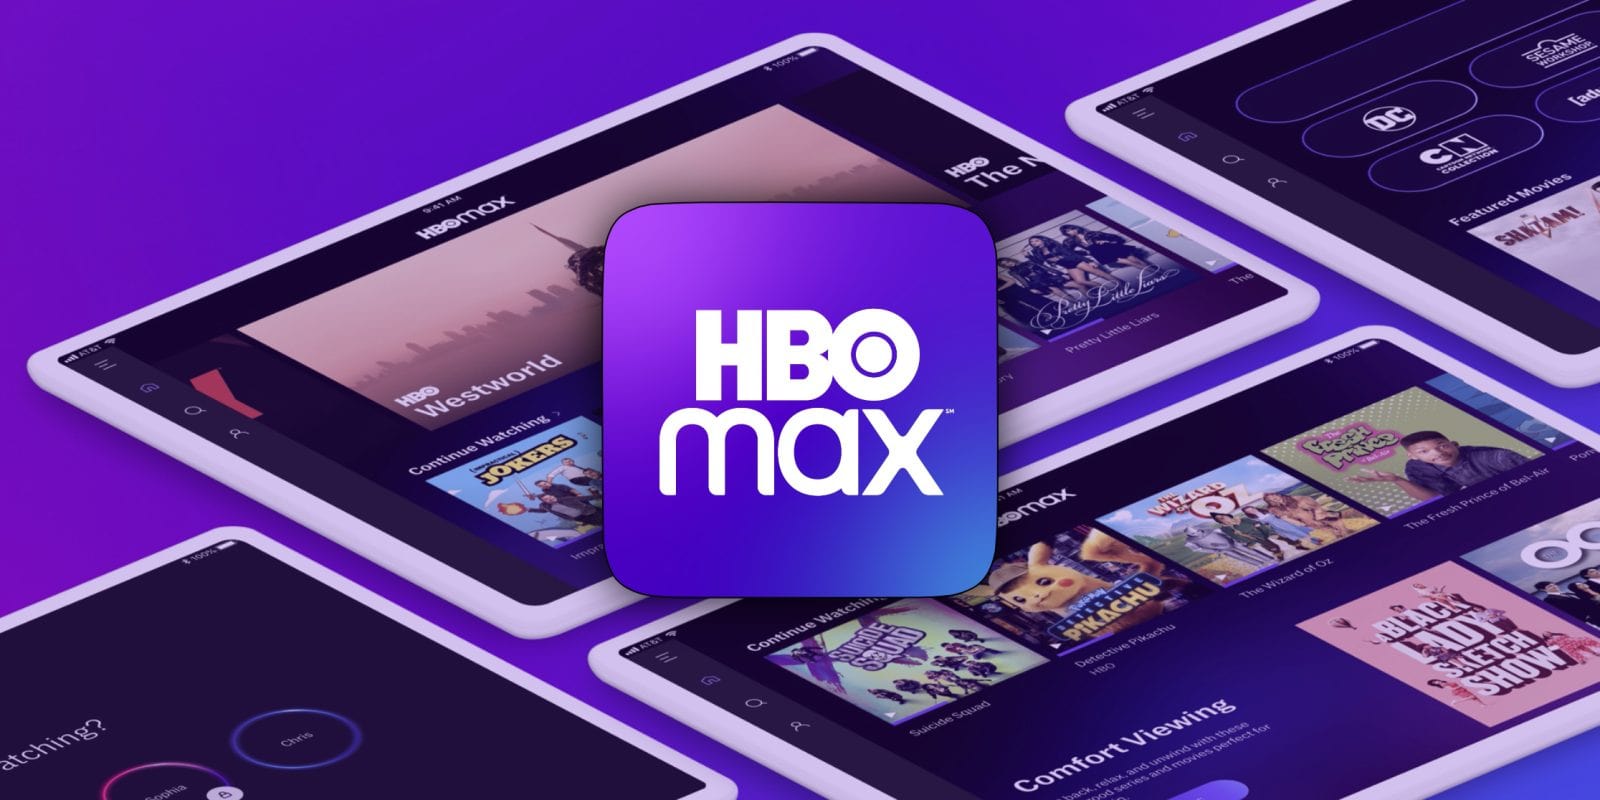 Hbomax.com/tvsignin - Enter Code - Activate HBO Max TVsignin